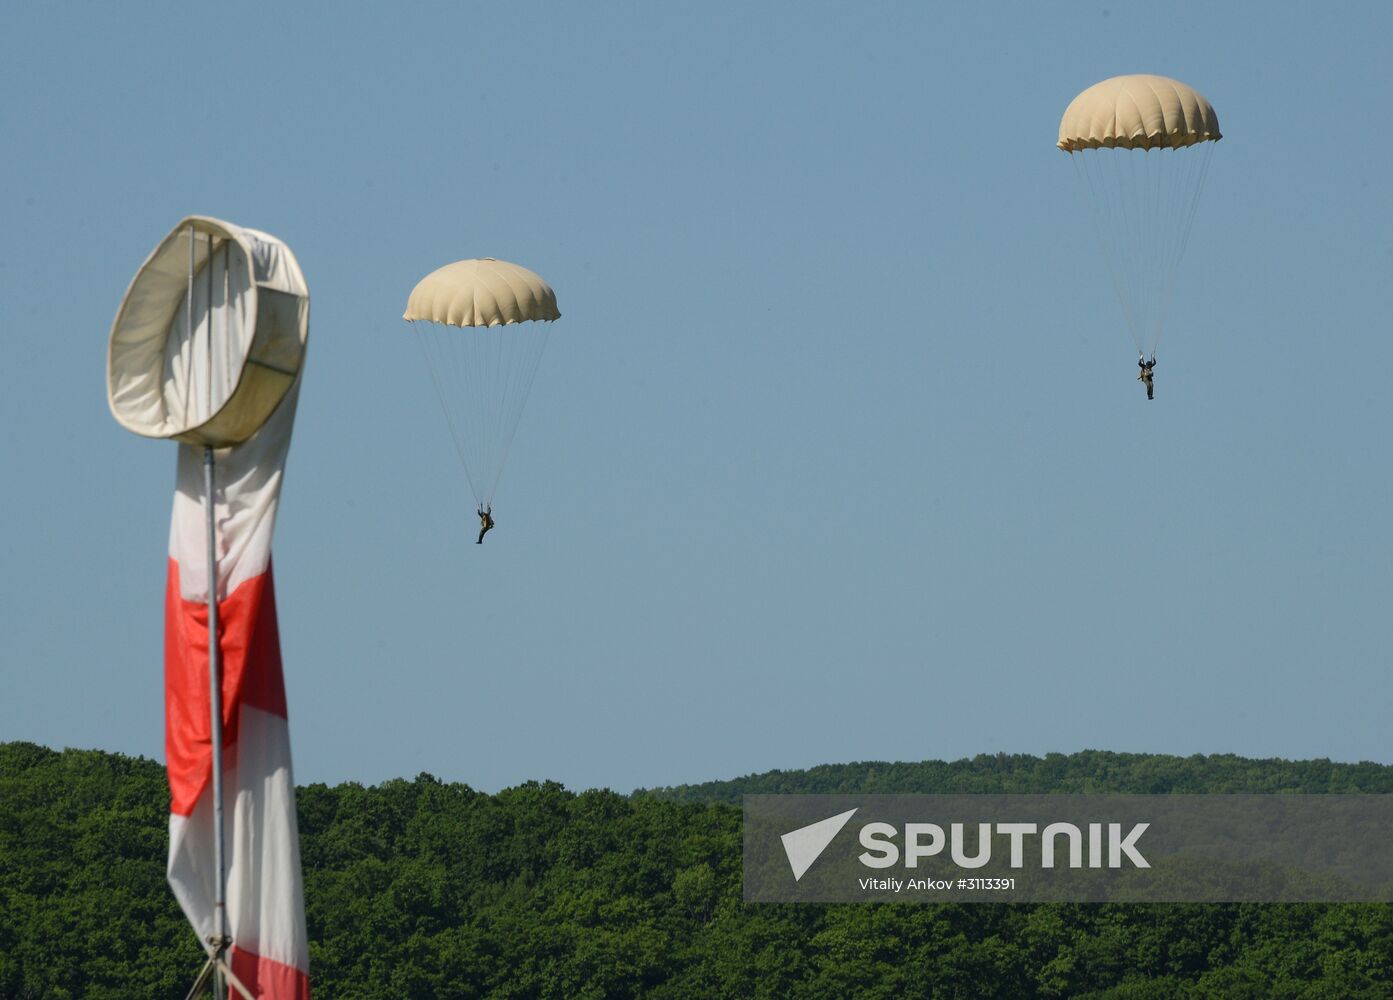 Ussurisk Suvorov military school cadets airdropped